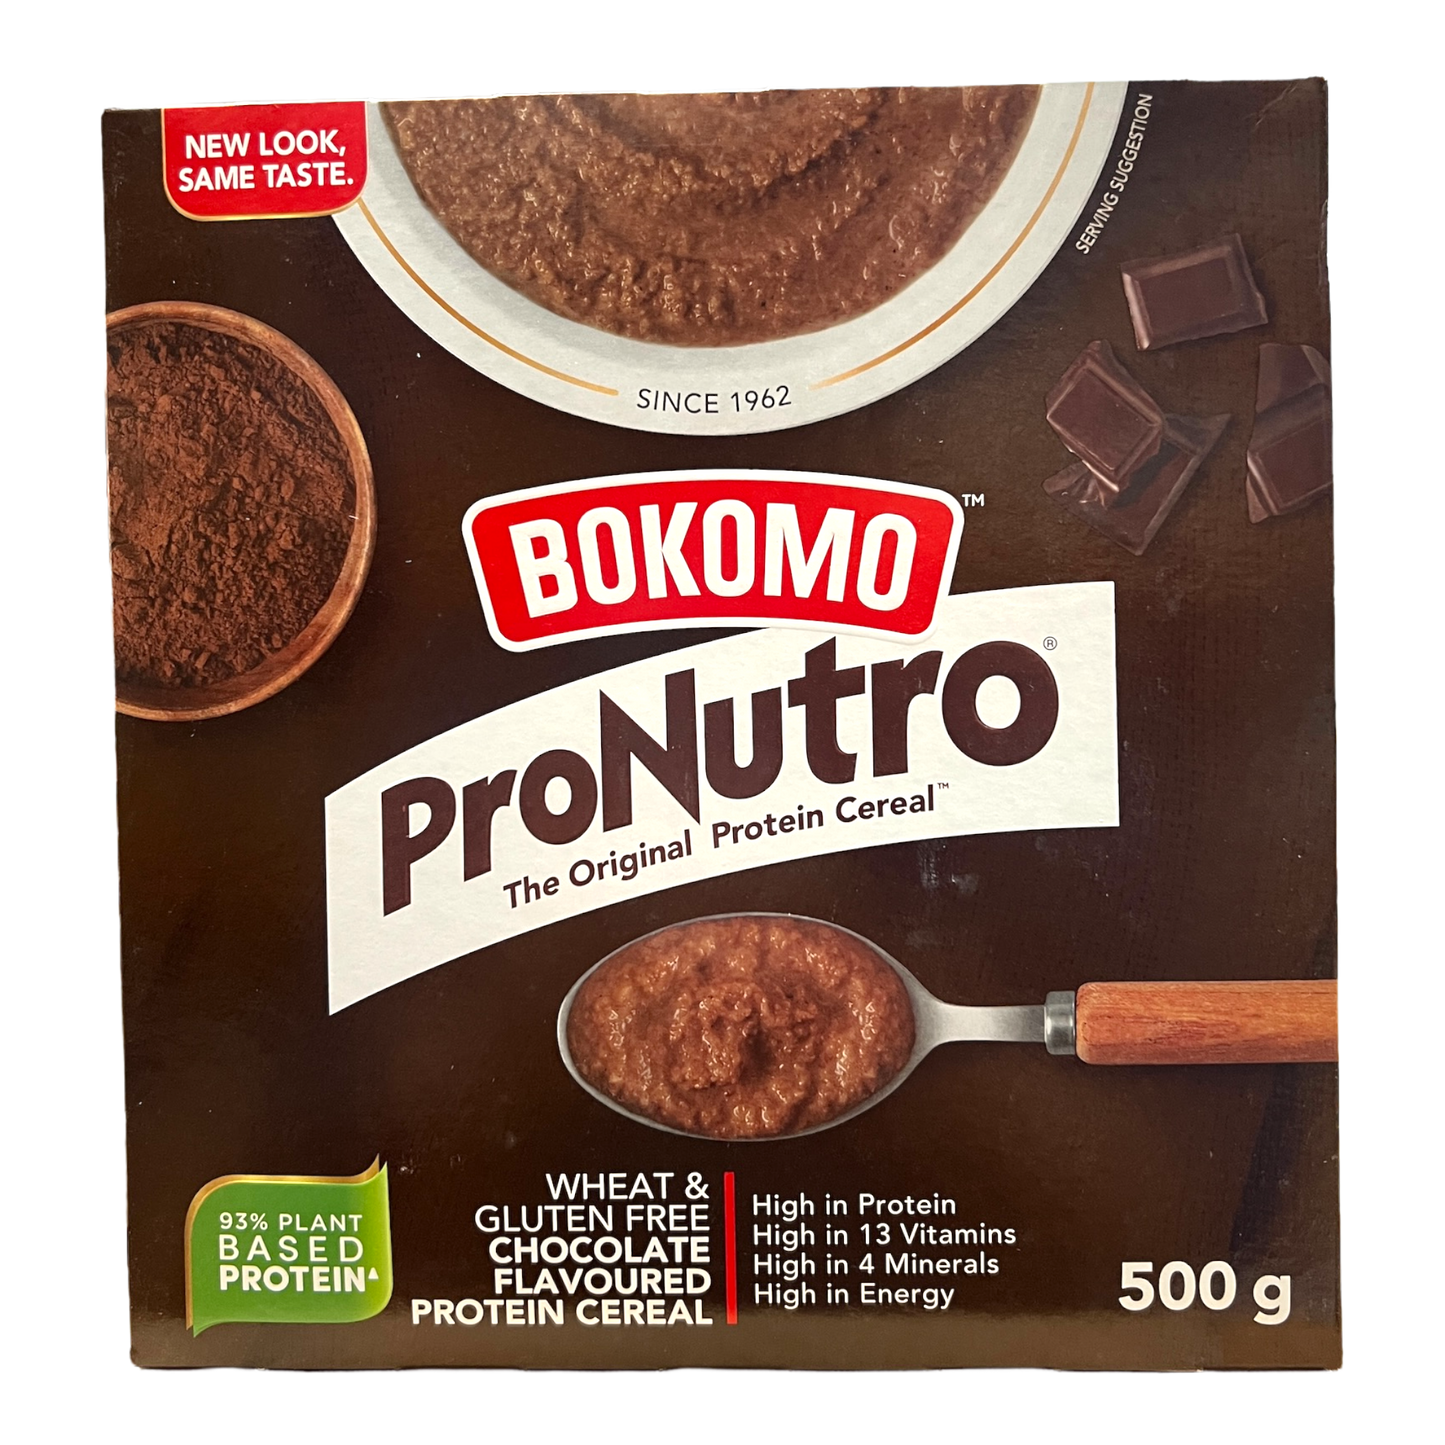 Bokomo Pronutro Chocolate Flavoured Protein Cereal 500g [South African]